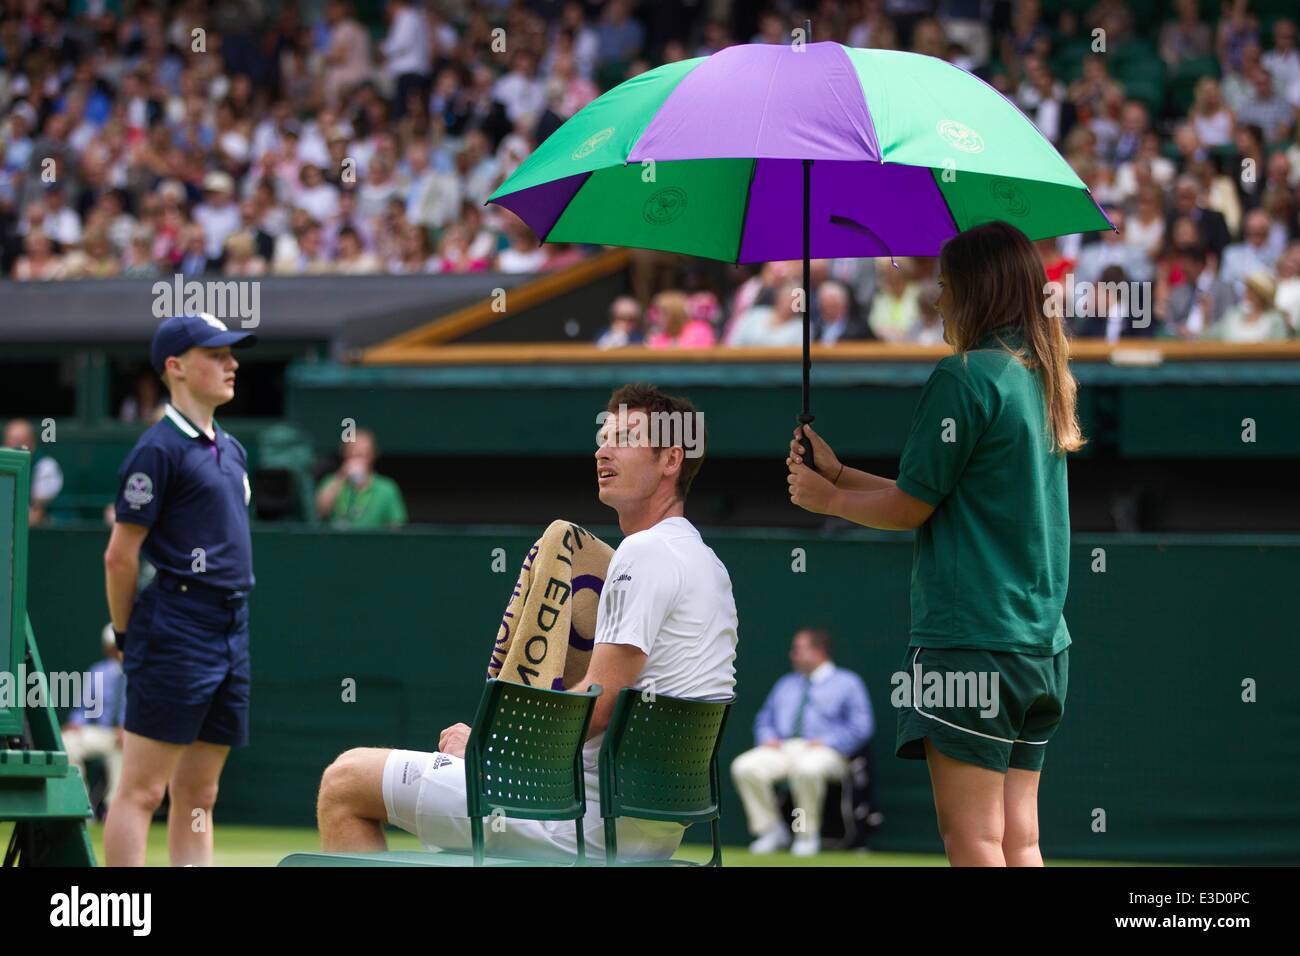 Wimbledon, London, UK. 23rd June, 2014. Picture shows Andy Murray defending his Wimbledon title on the first day of Wimbledon Tennis Campionships 2014 against David Goffen (BEL). Credit:  Clickpics/Alamy Live News Stock Photo